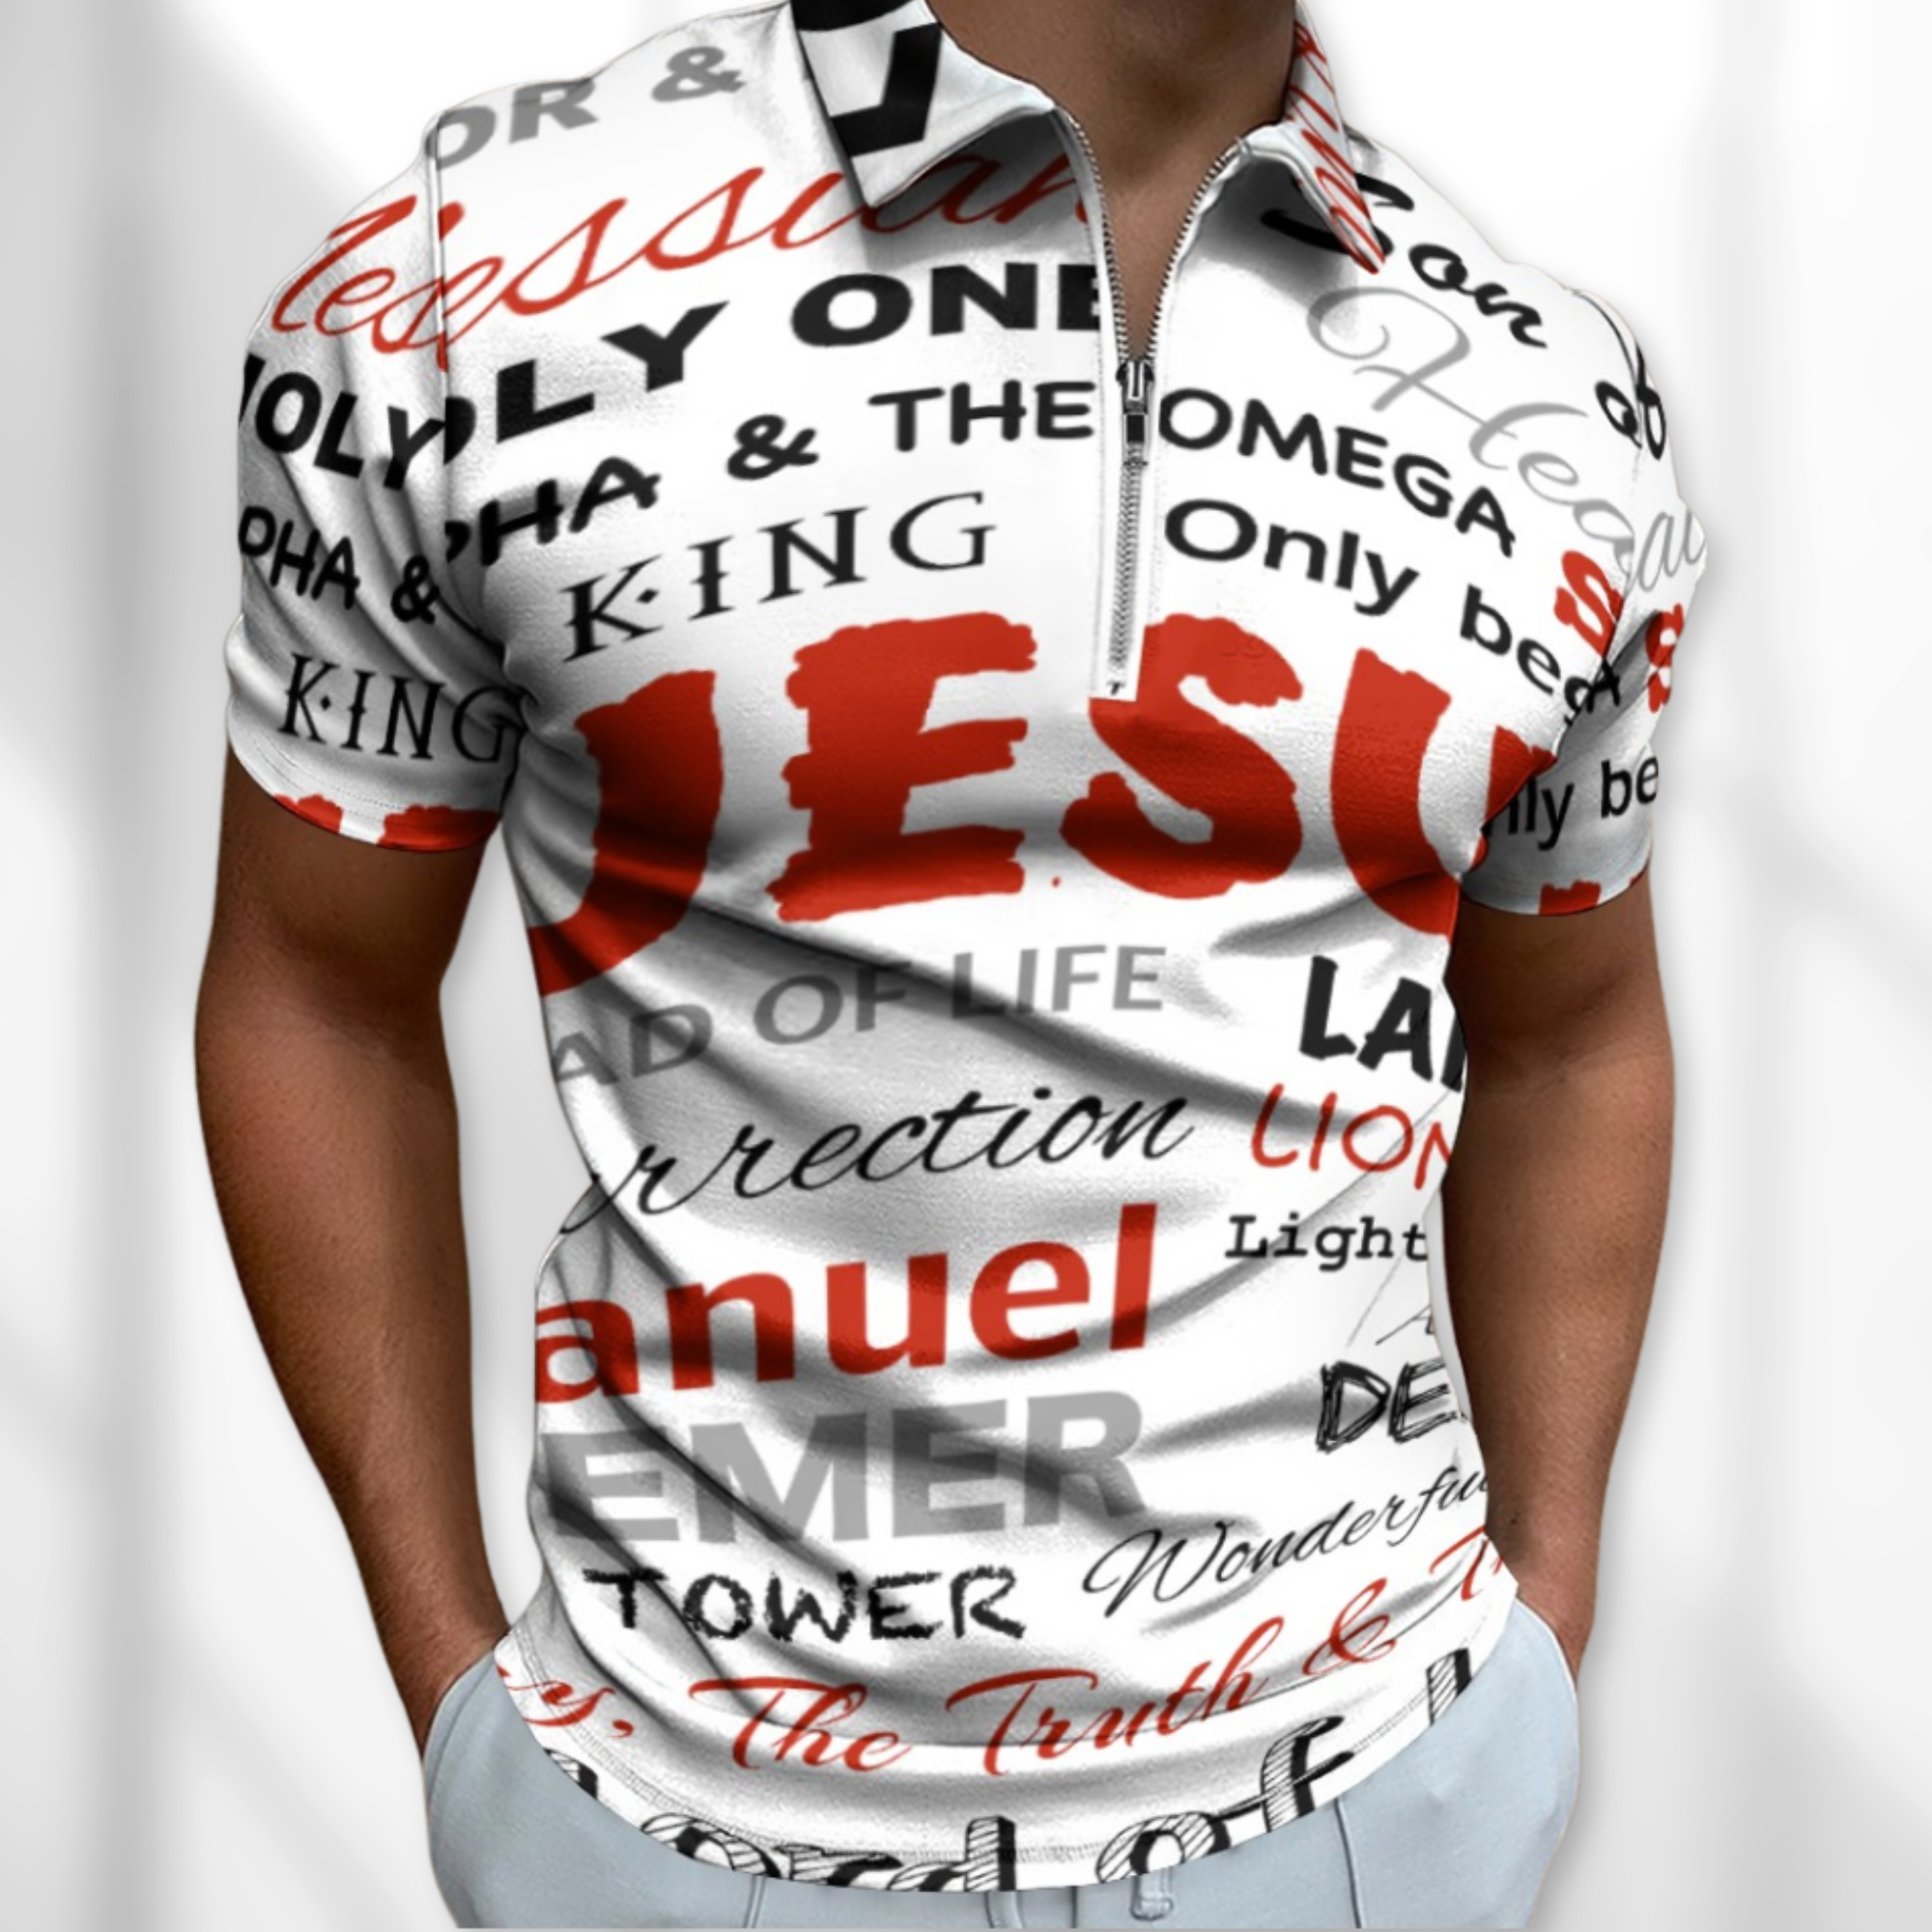 Many Names of Jesus Short Sleeve Polo Shirt Size: 2XS Color: White Jesus Passion Apparel